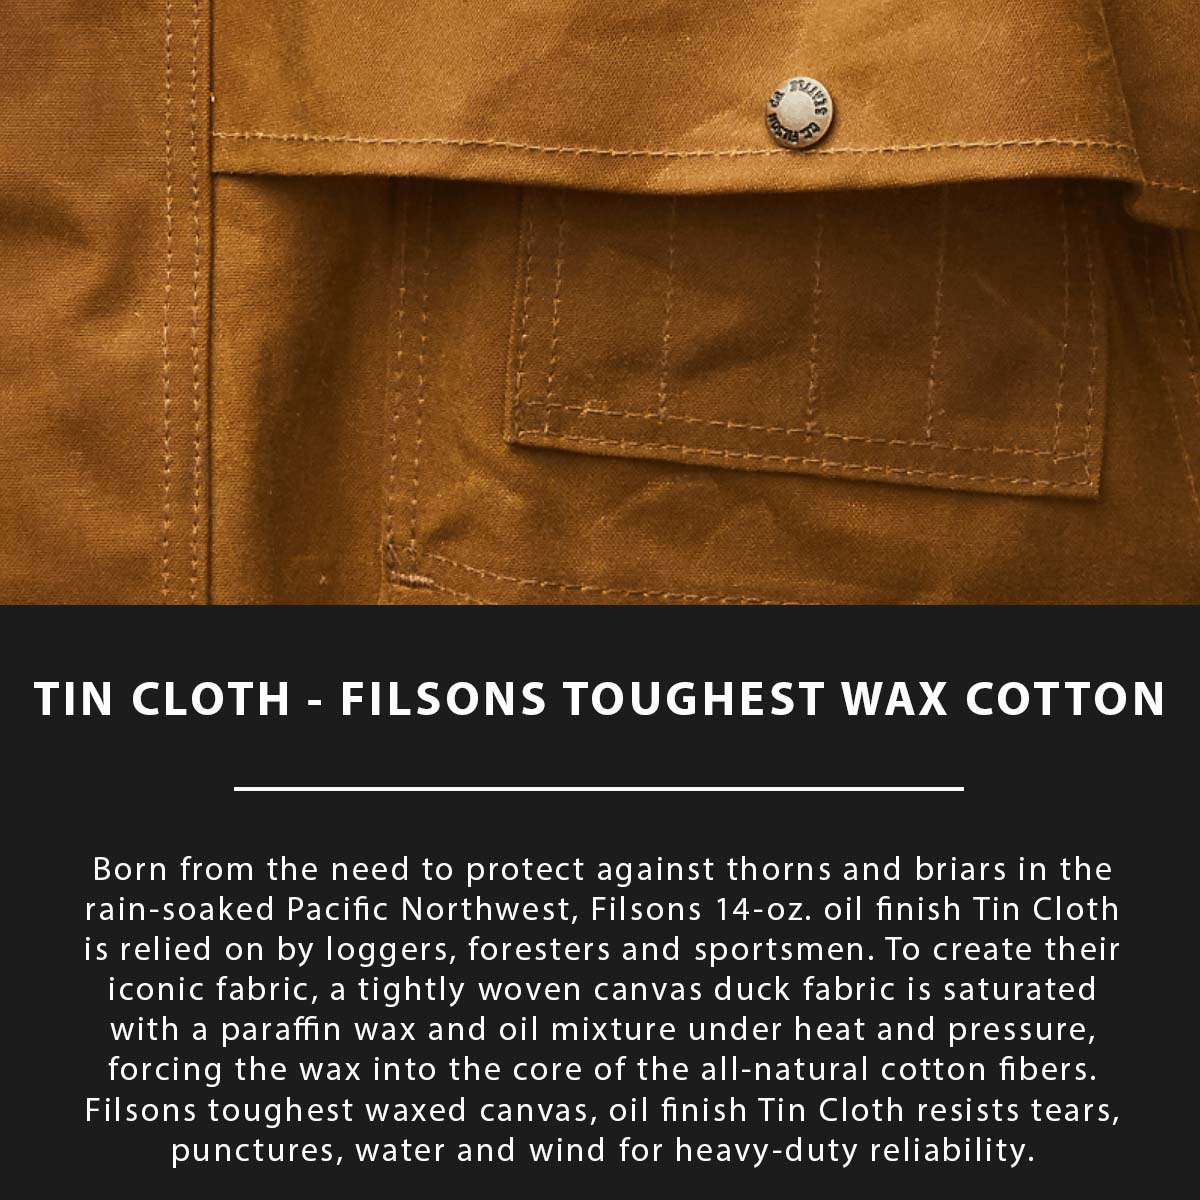 Filson Lined Tin Cloth Cruiser Jacket, made of the legendary super strong, lightweight, and oil impregnated 14-oz. Tin Cloth canvas